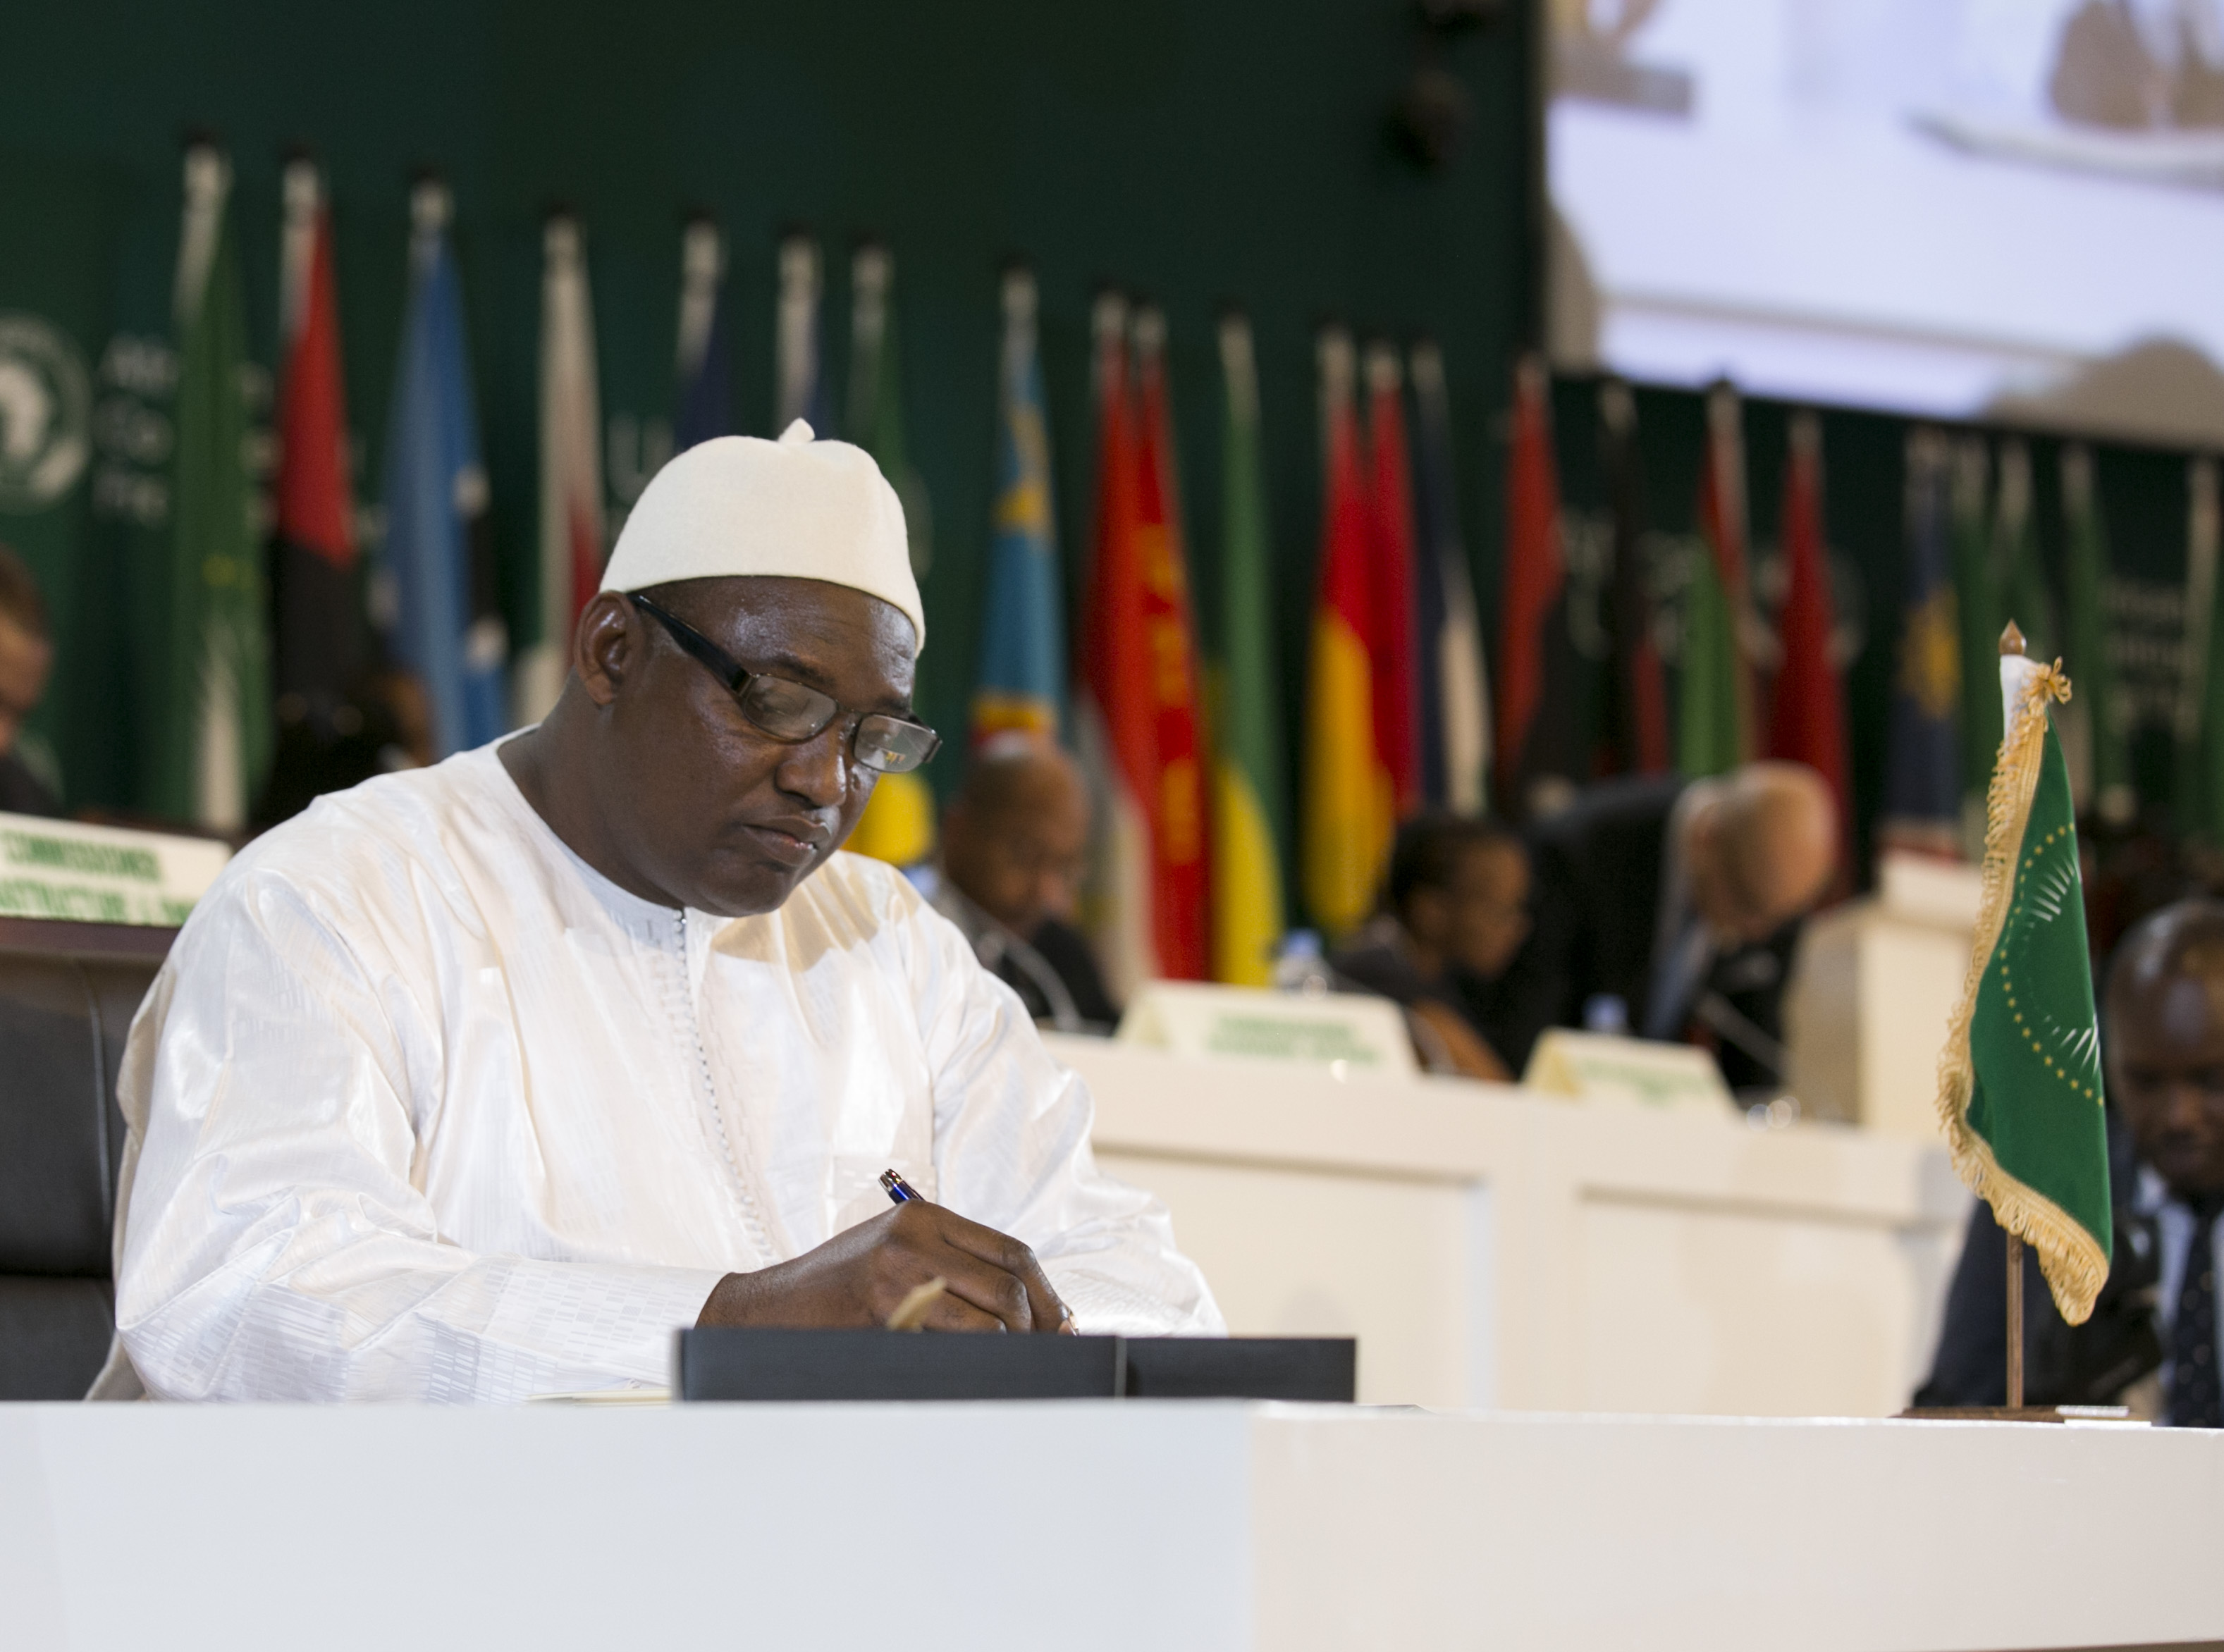 President Adama Barrow of the Gambia (photo credit: Paul Kagame / flickr)